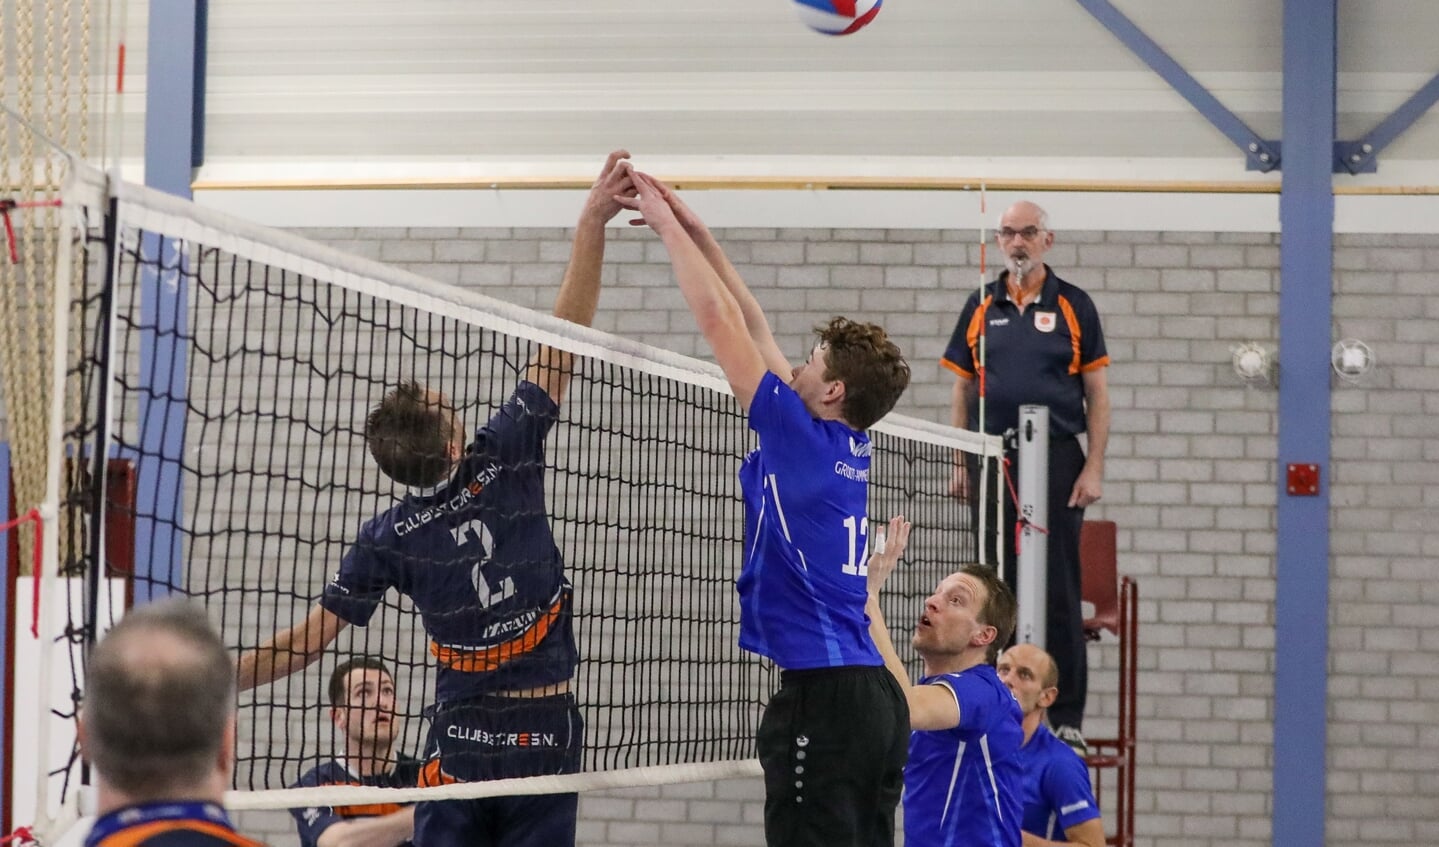 • VC WIK - Next Volley (1-3).